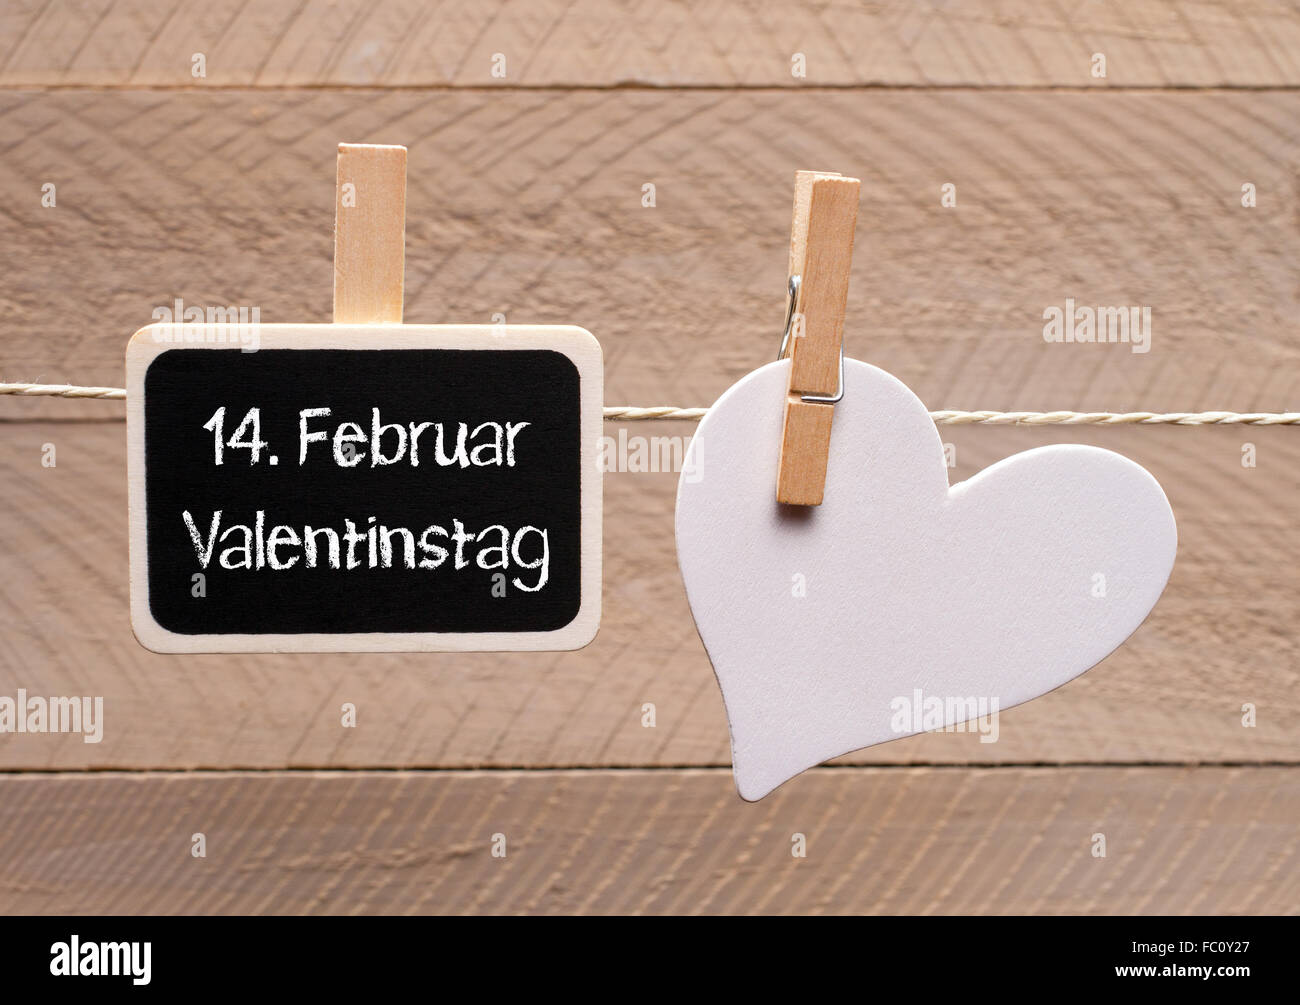 Valentines Day on February 14 Stock Photo